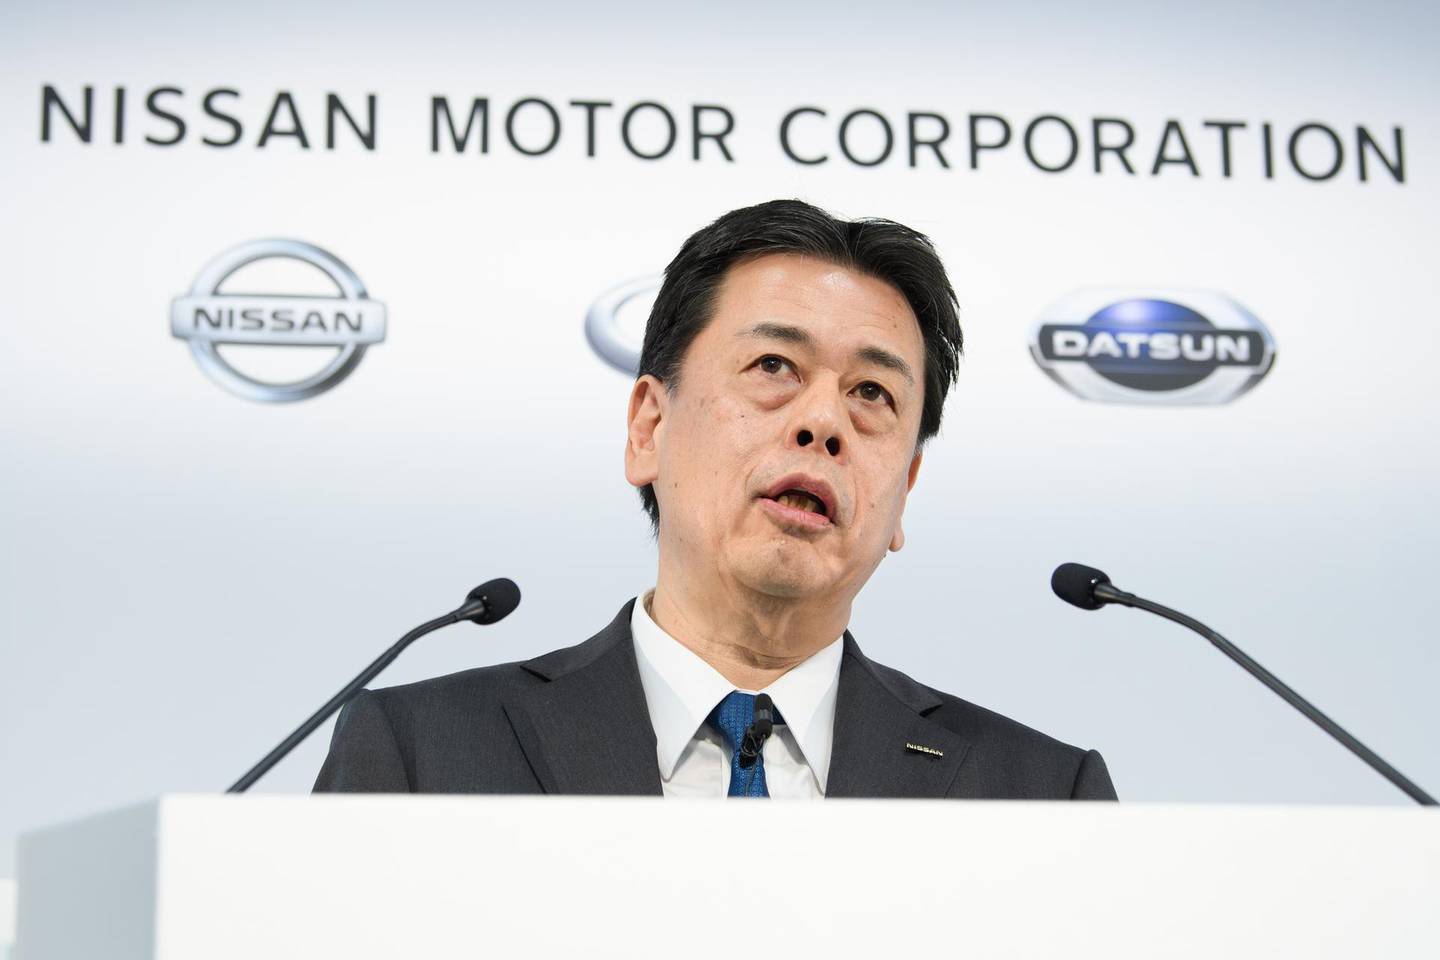 Makoto Uchida, president and chief executive officer of Nissan Motor Co., speaks during a news conference at the company's headquarters in Yokohama, Japan, on Thursday, Feb. 13, 2020. Nissan cut its full-year profit outlook for the second time in as many quarters and scrapped its year-end dividend, renewing concern about the troubled automaker’s ability return cash to investors, especially top shareholder and partner Renault SA. Photographer: Akio Kon/Bloomberg